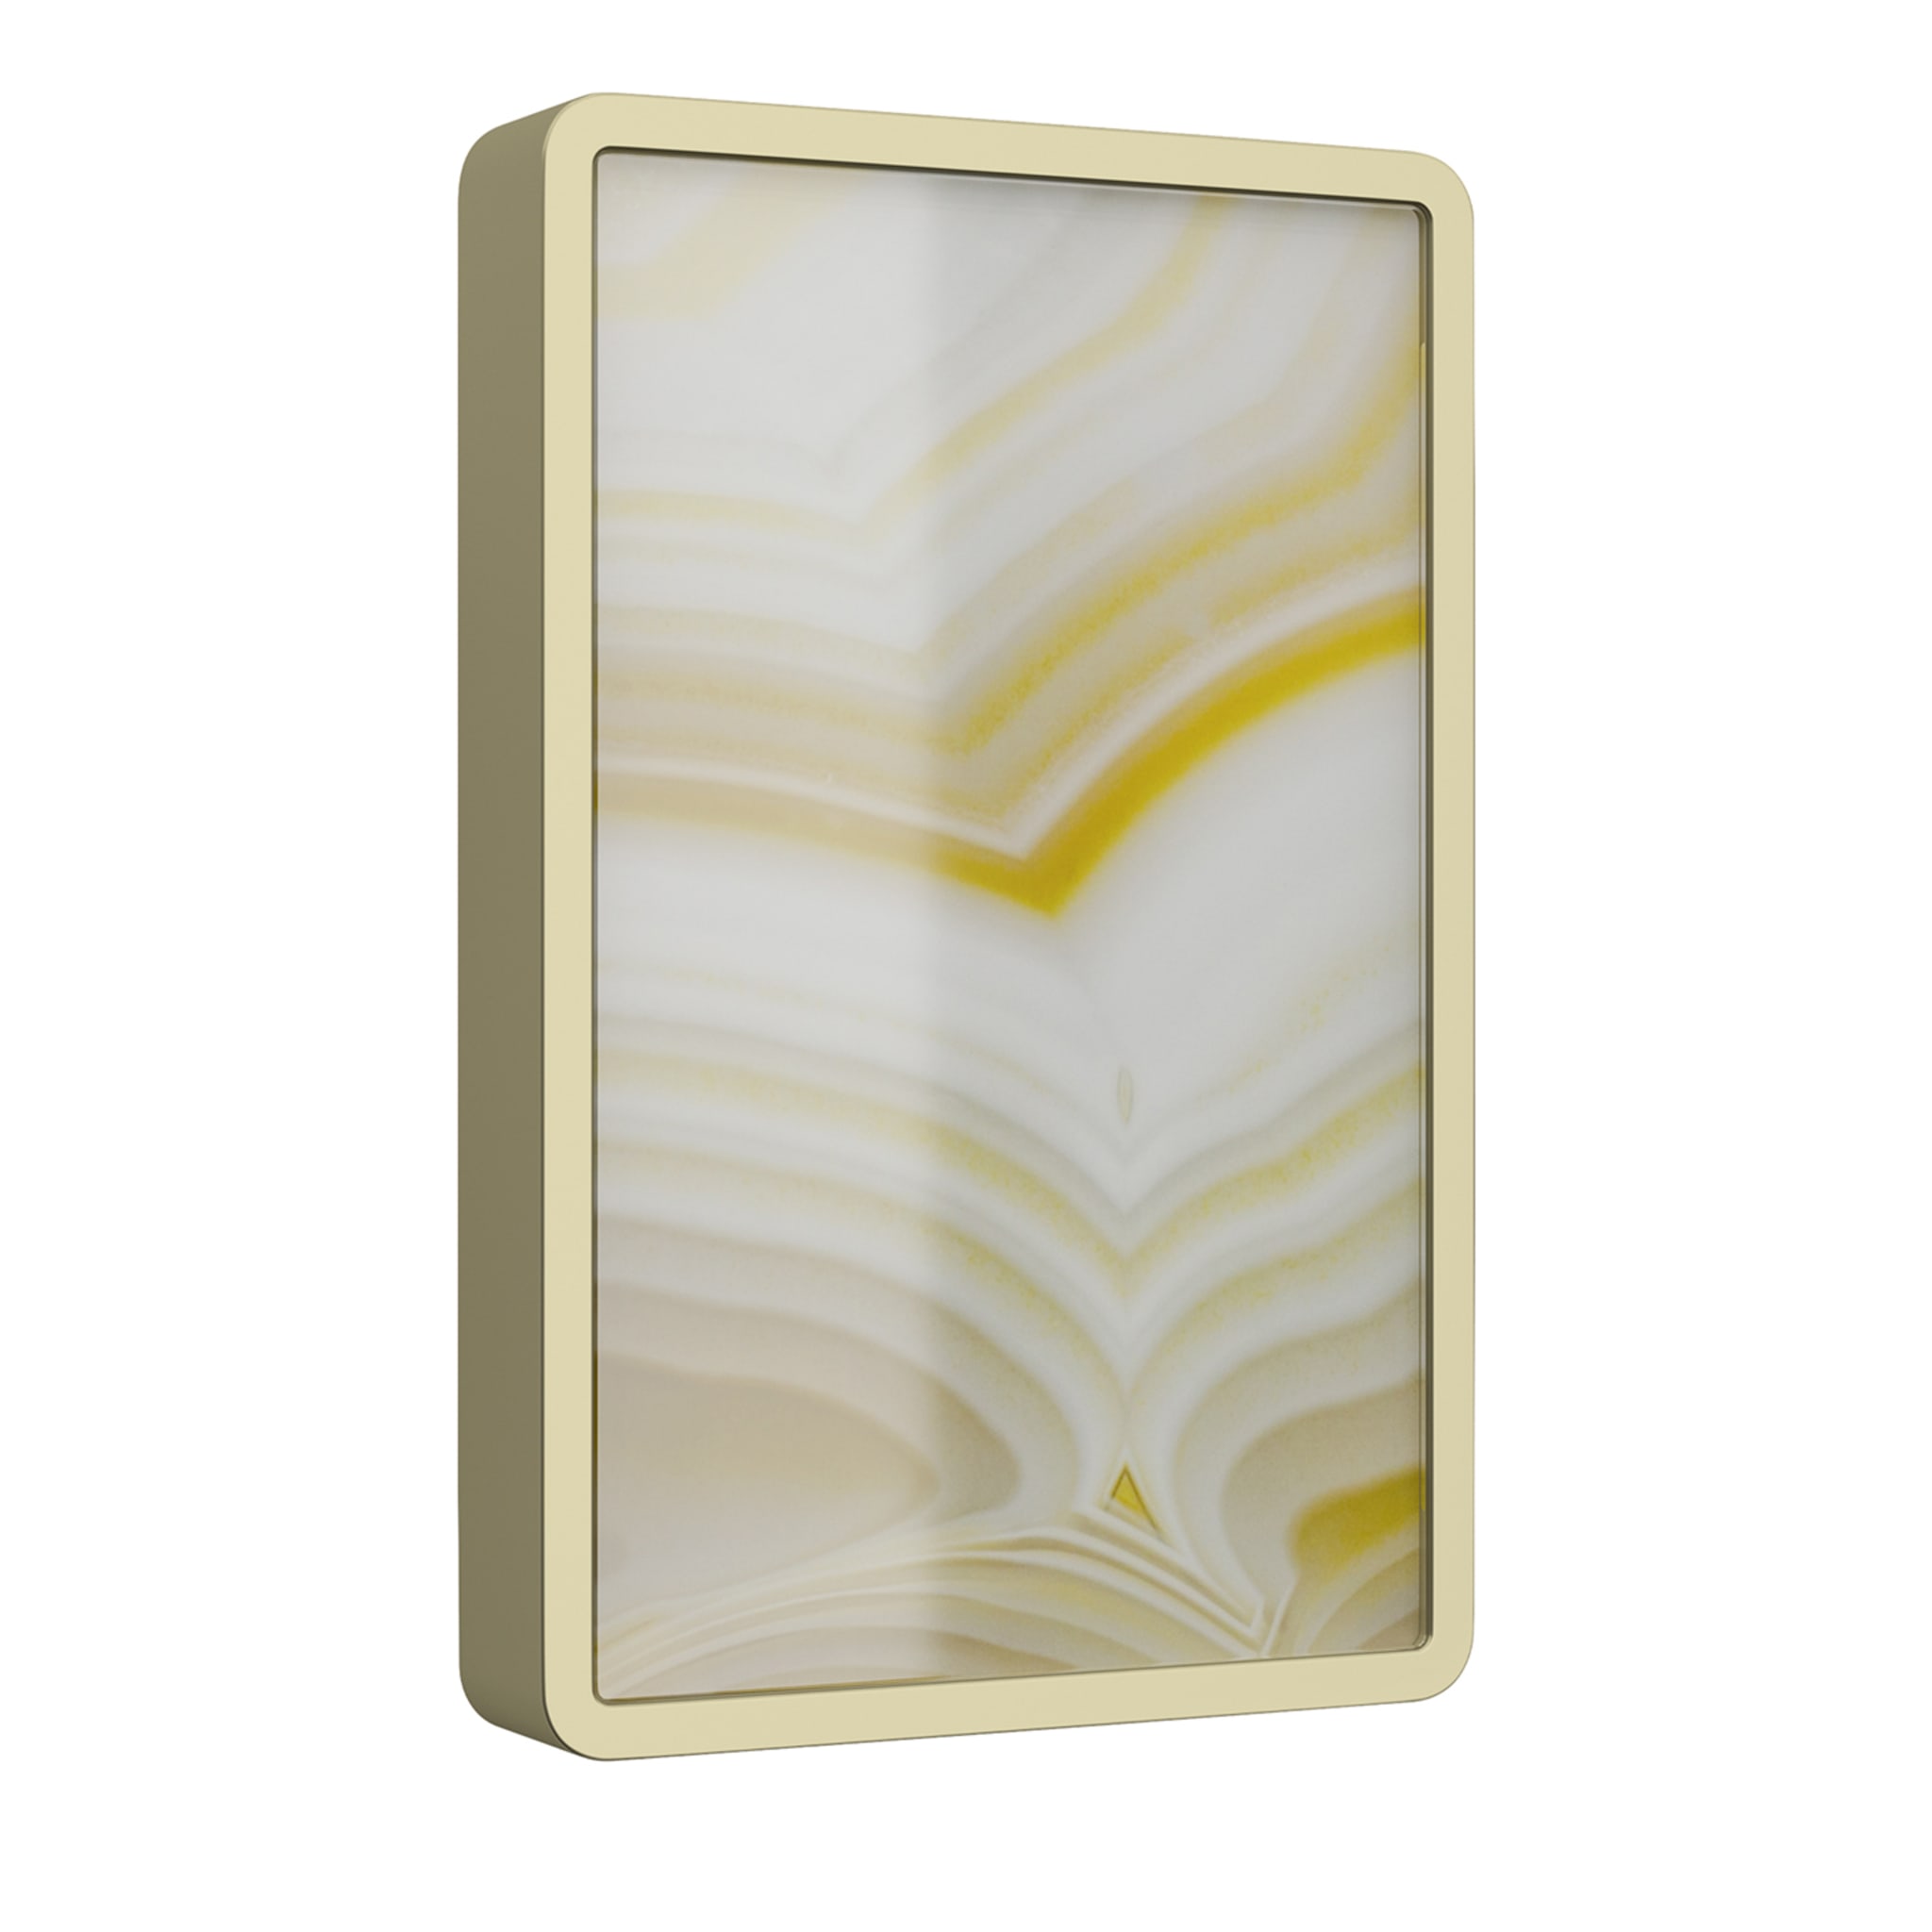 Gemma Wall Sconce - Main view